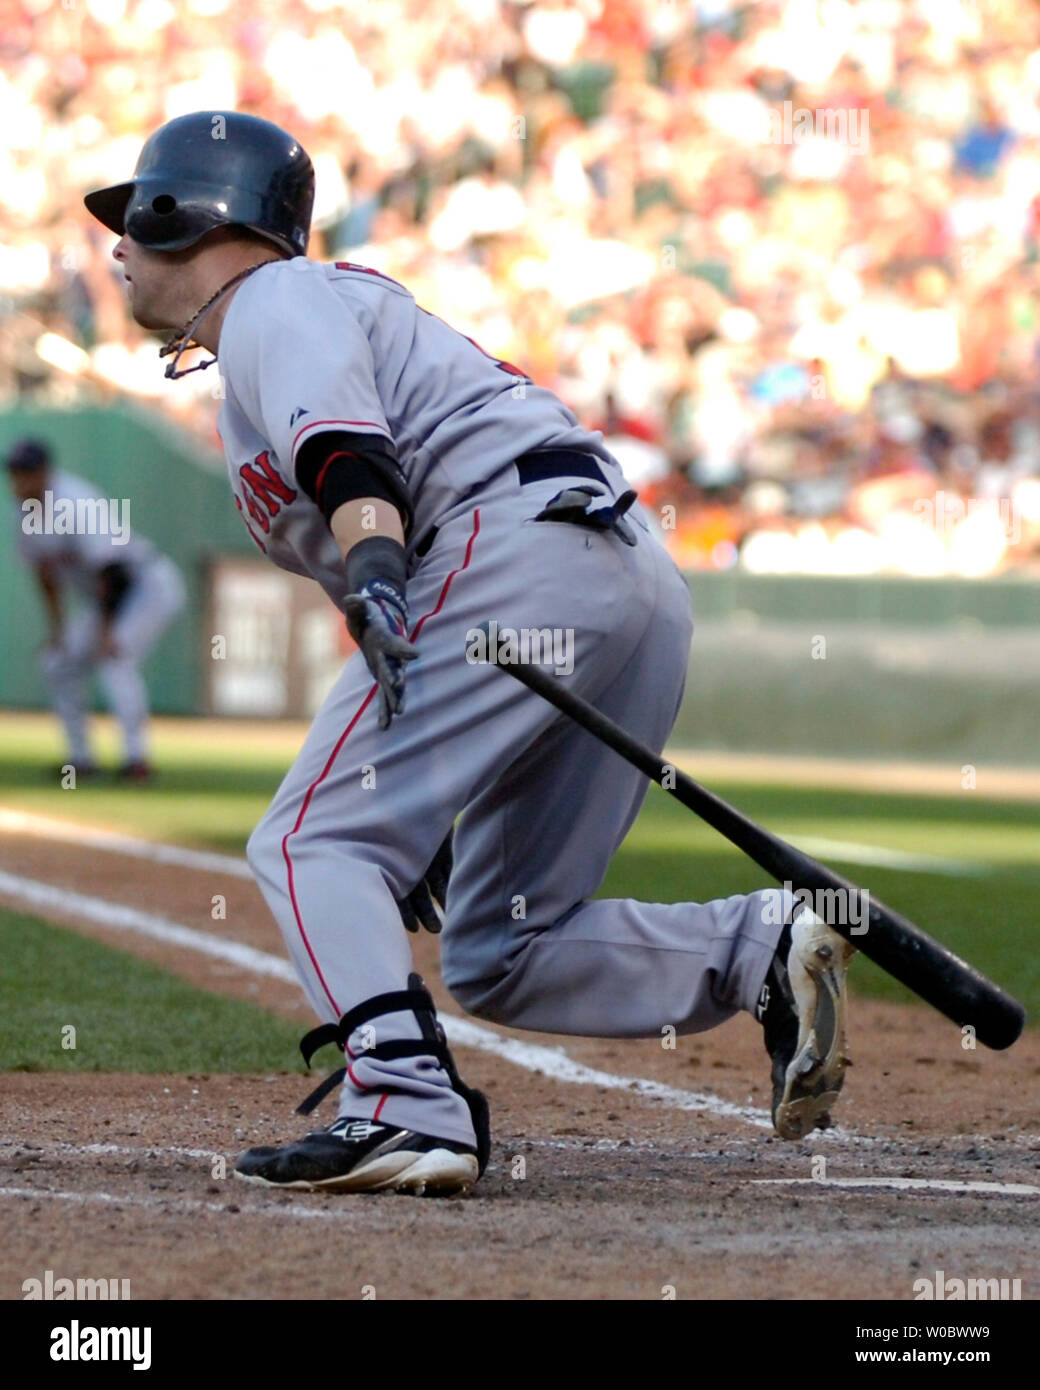 Boston Red Sox second baseman Dustin Pedroia hits an RBI single scoring  catcher Jason Varitek against Orioles pitcher Paul Shuey with the bases  loaded in the eighth inning at Camden Yards in